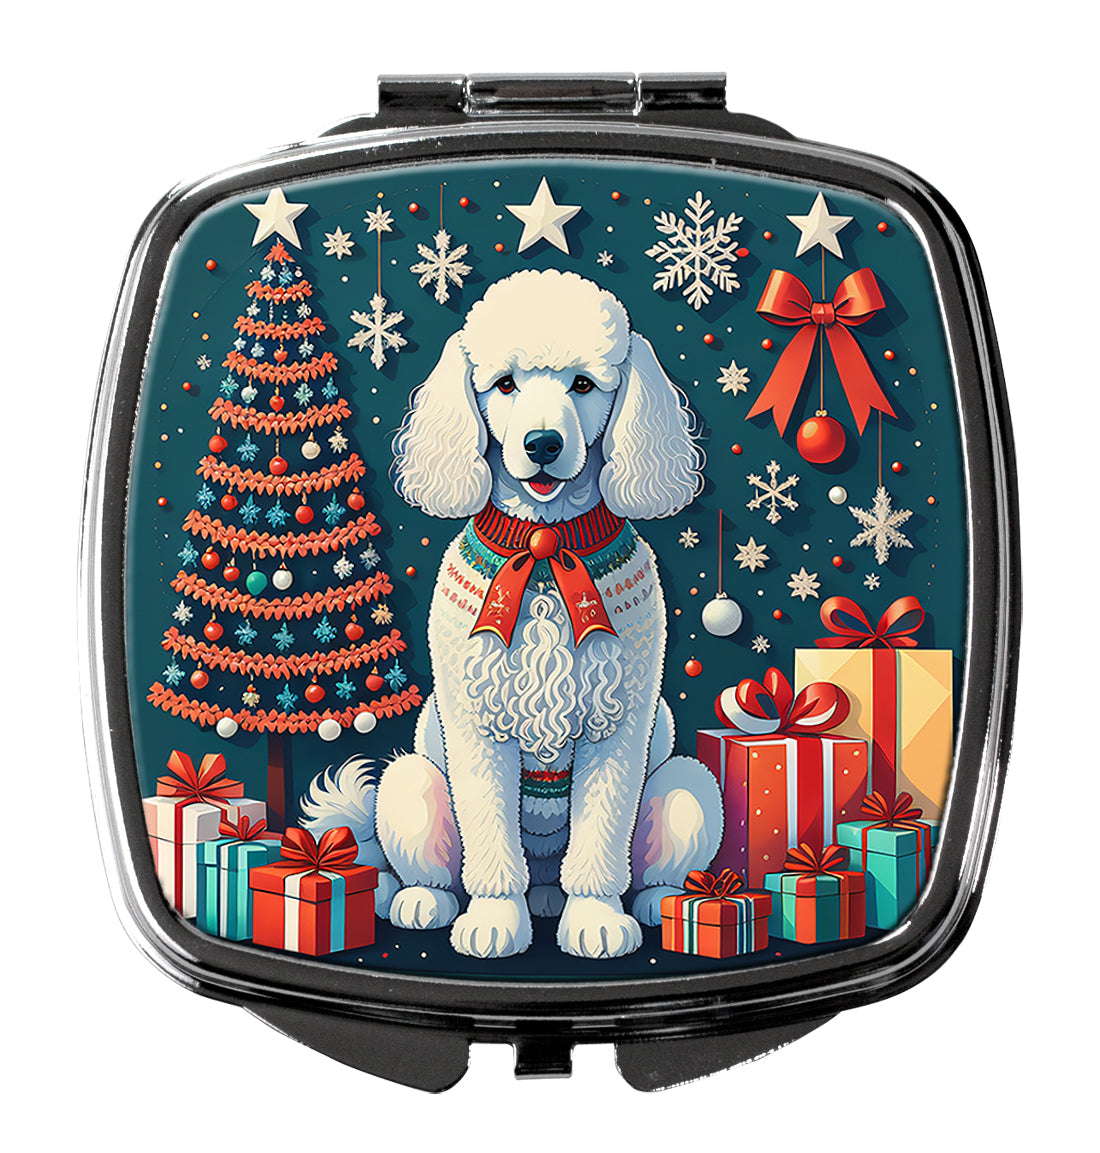 Buy this White Poodle Christmas Compact Mirror